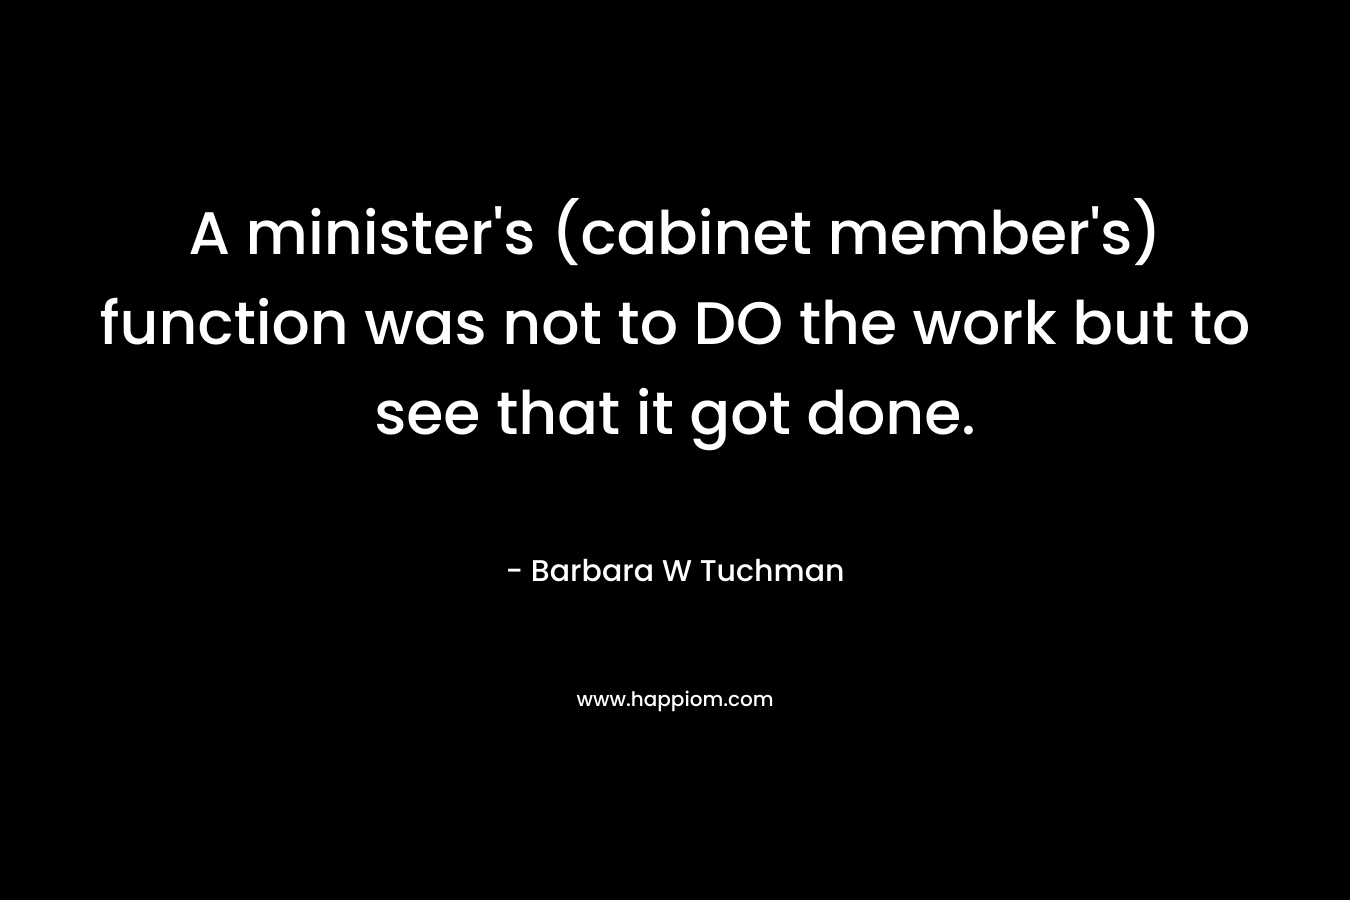 A minister's (cabinet member's) function was not to DO the work but to see that it got done.